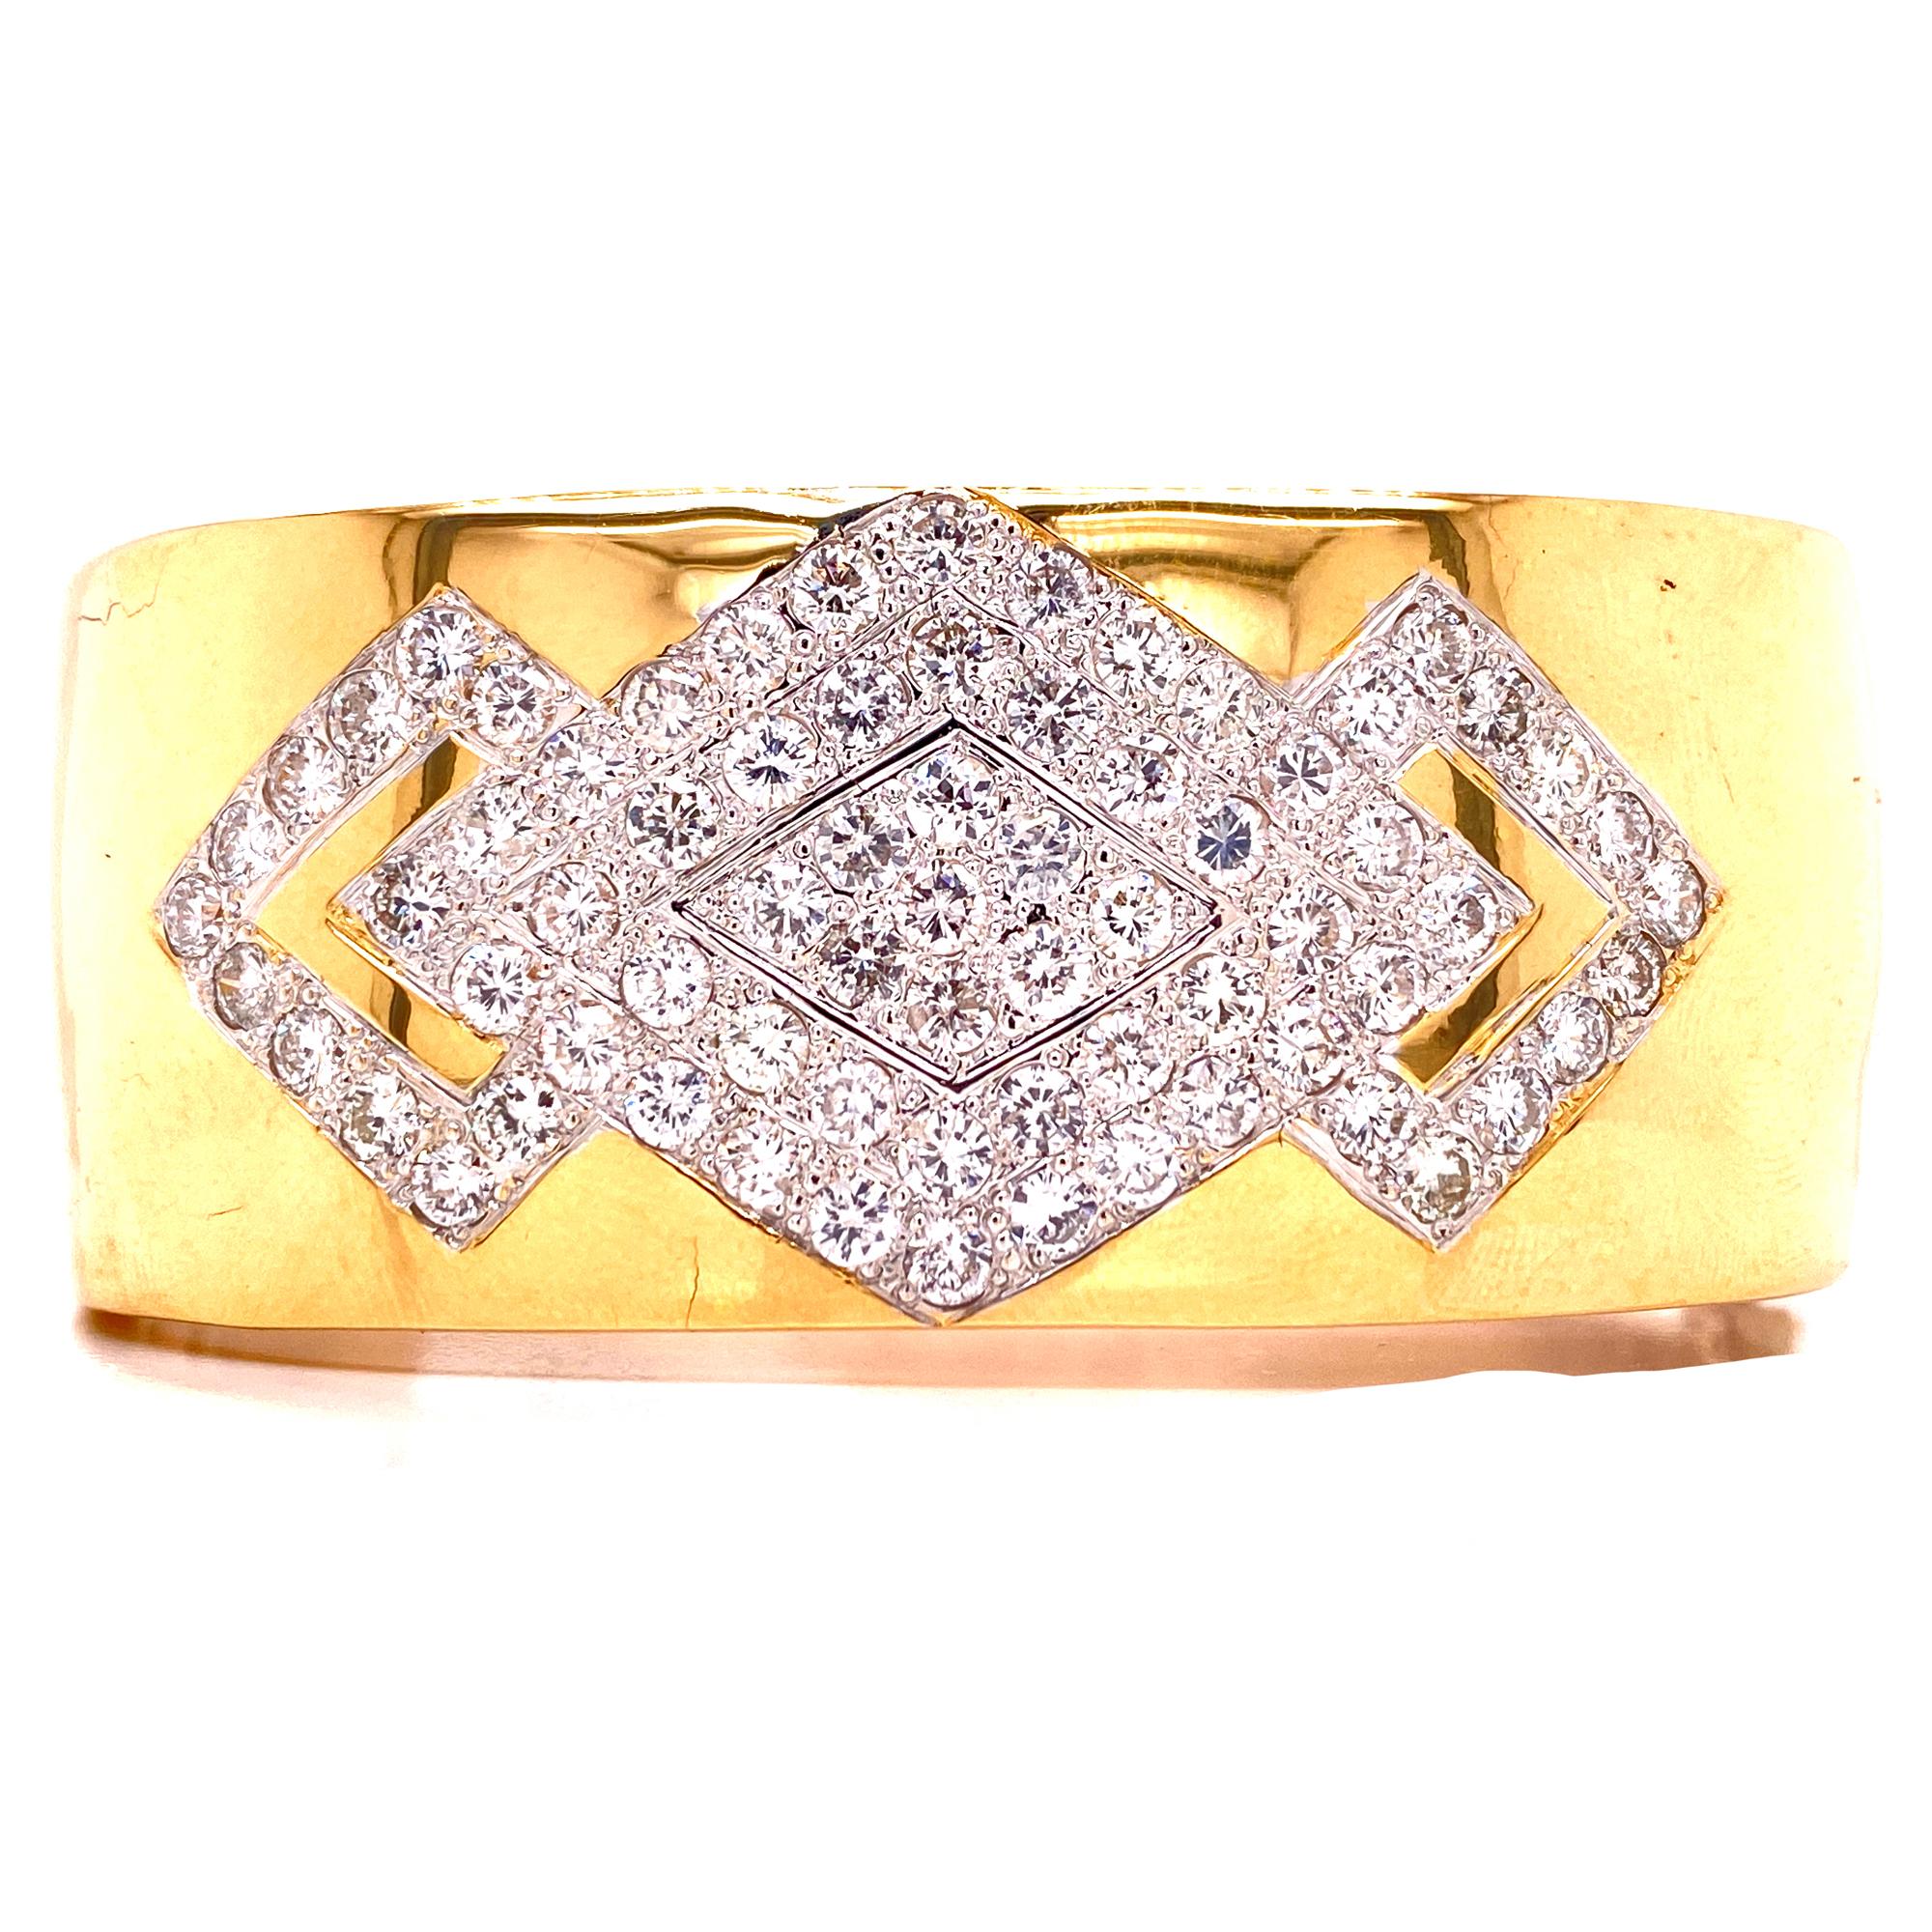 This stunning wide bangle bracelet is fashioned in solid 14 karat yellow gold. The square shape bangle features 75 round brilliant cut diamonds weighing approximately 4.50 carat total weight. The bangle measures 1.0 inch in width and 7 inches in